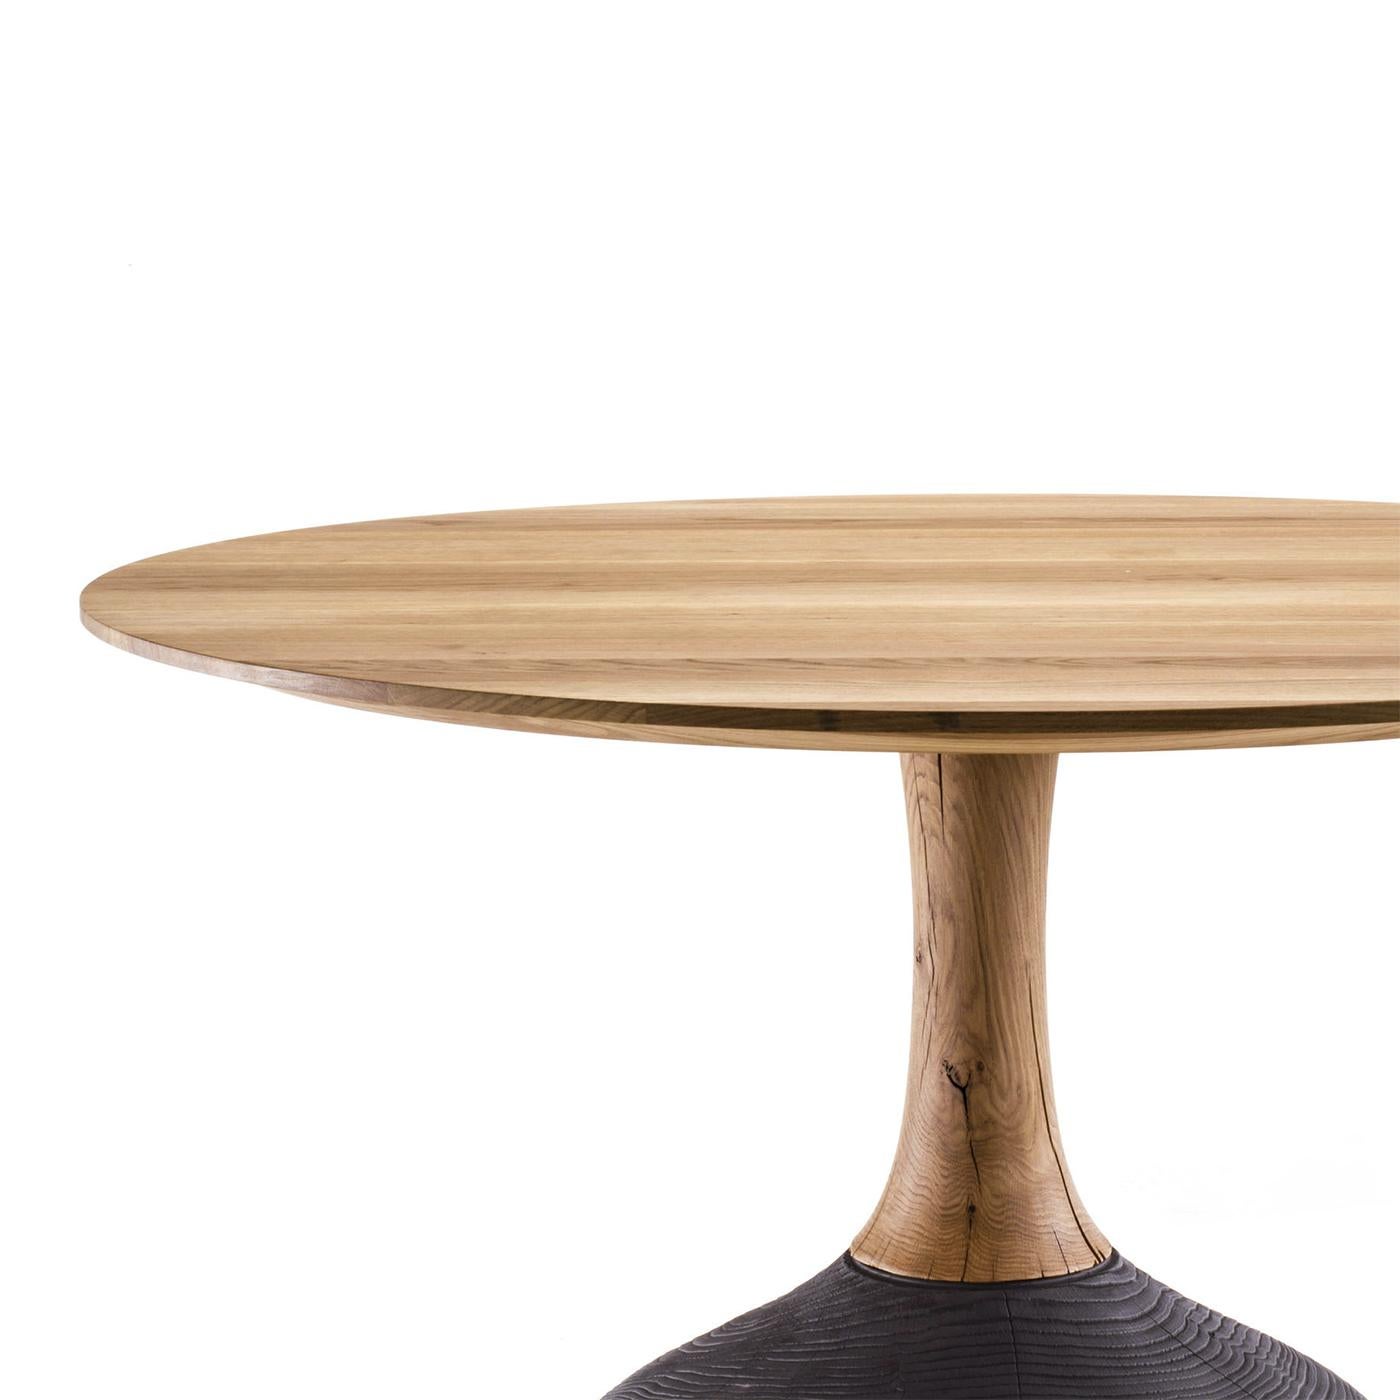 Dining table Ennio round with top made of solid oak
glued slats, with central leg in solid oak and with base
in solid cedar in burnt finish.
Available on request in:
Diameter 80 x Height 74,5cm, price: 6900,00€
Diameter 100 x Height 74,5cm,